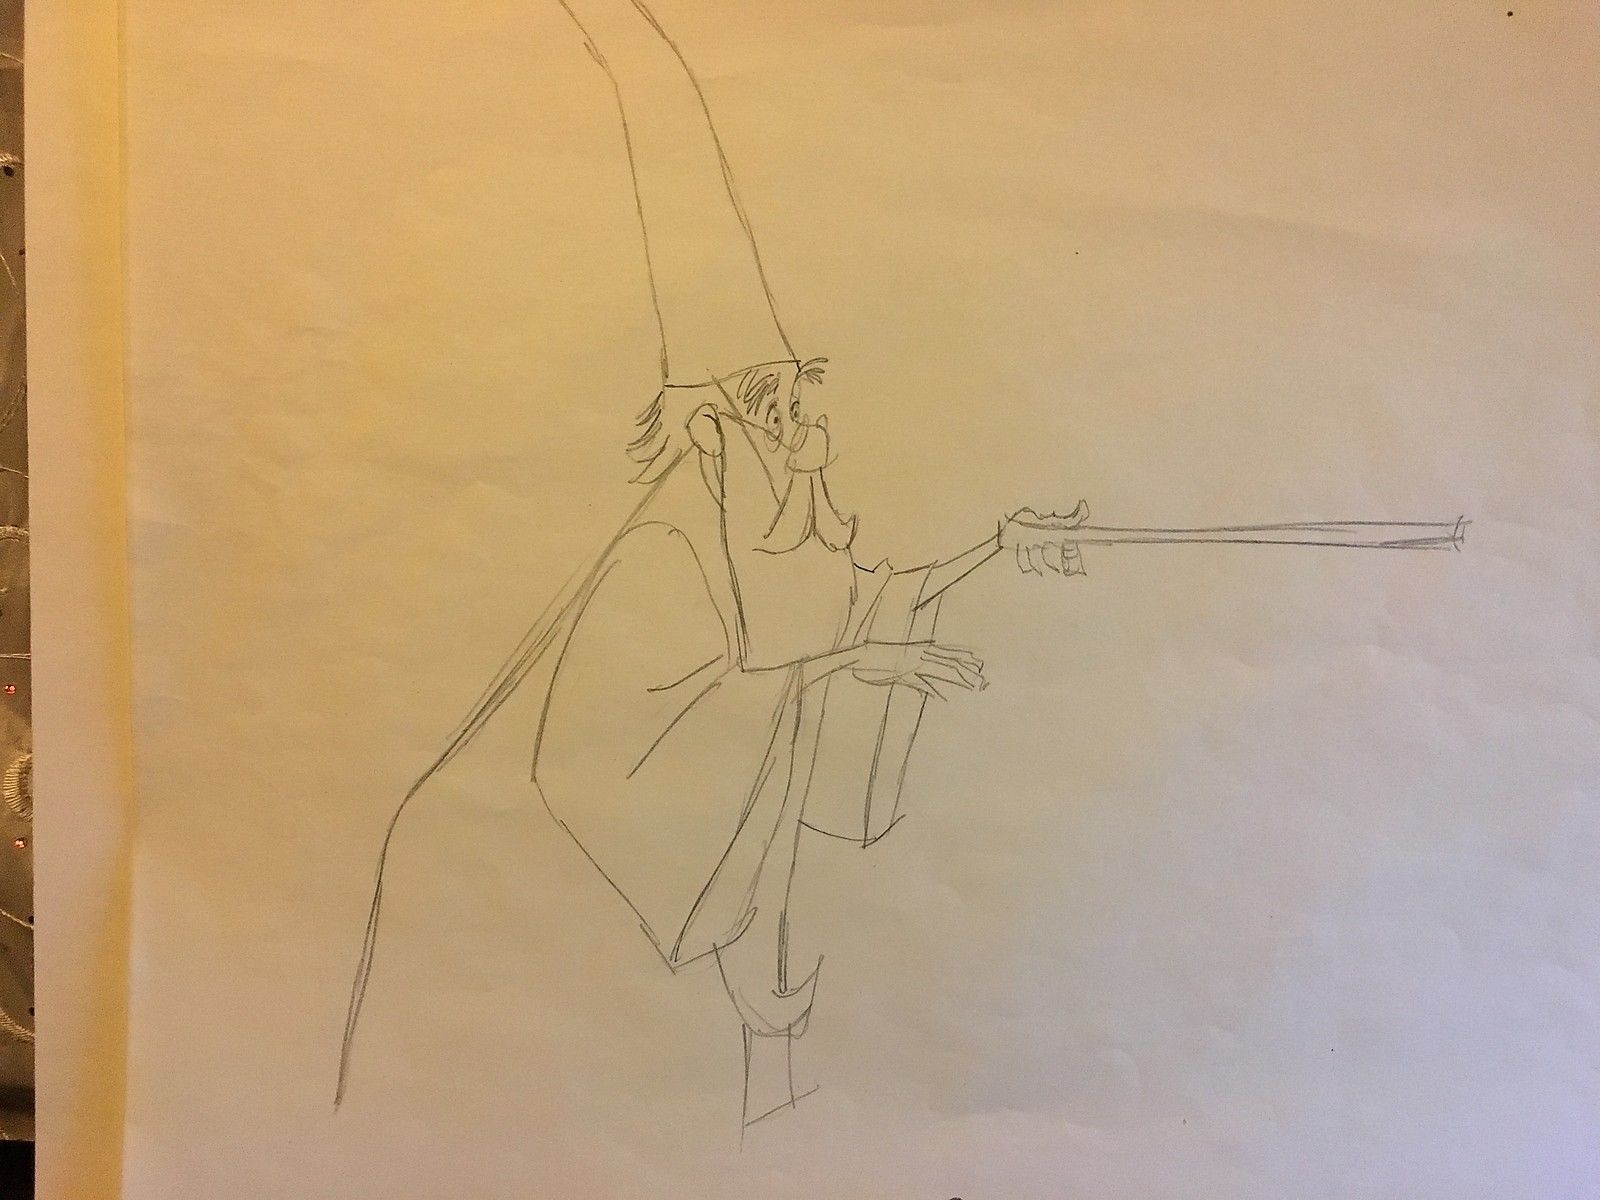 Disney The Sword In The Stone Animation Production Drawing Wizard Merlin 1963 - $1,150.00